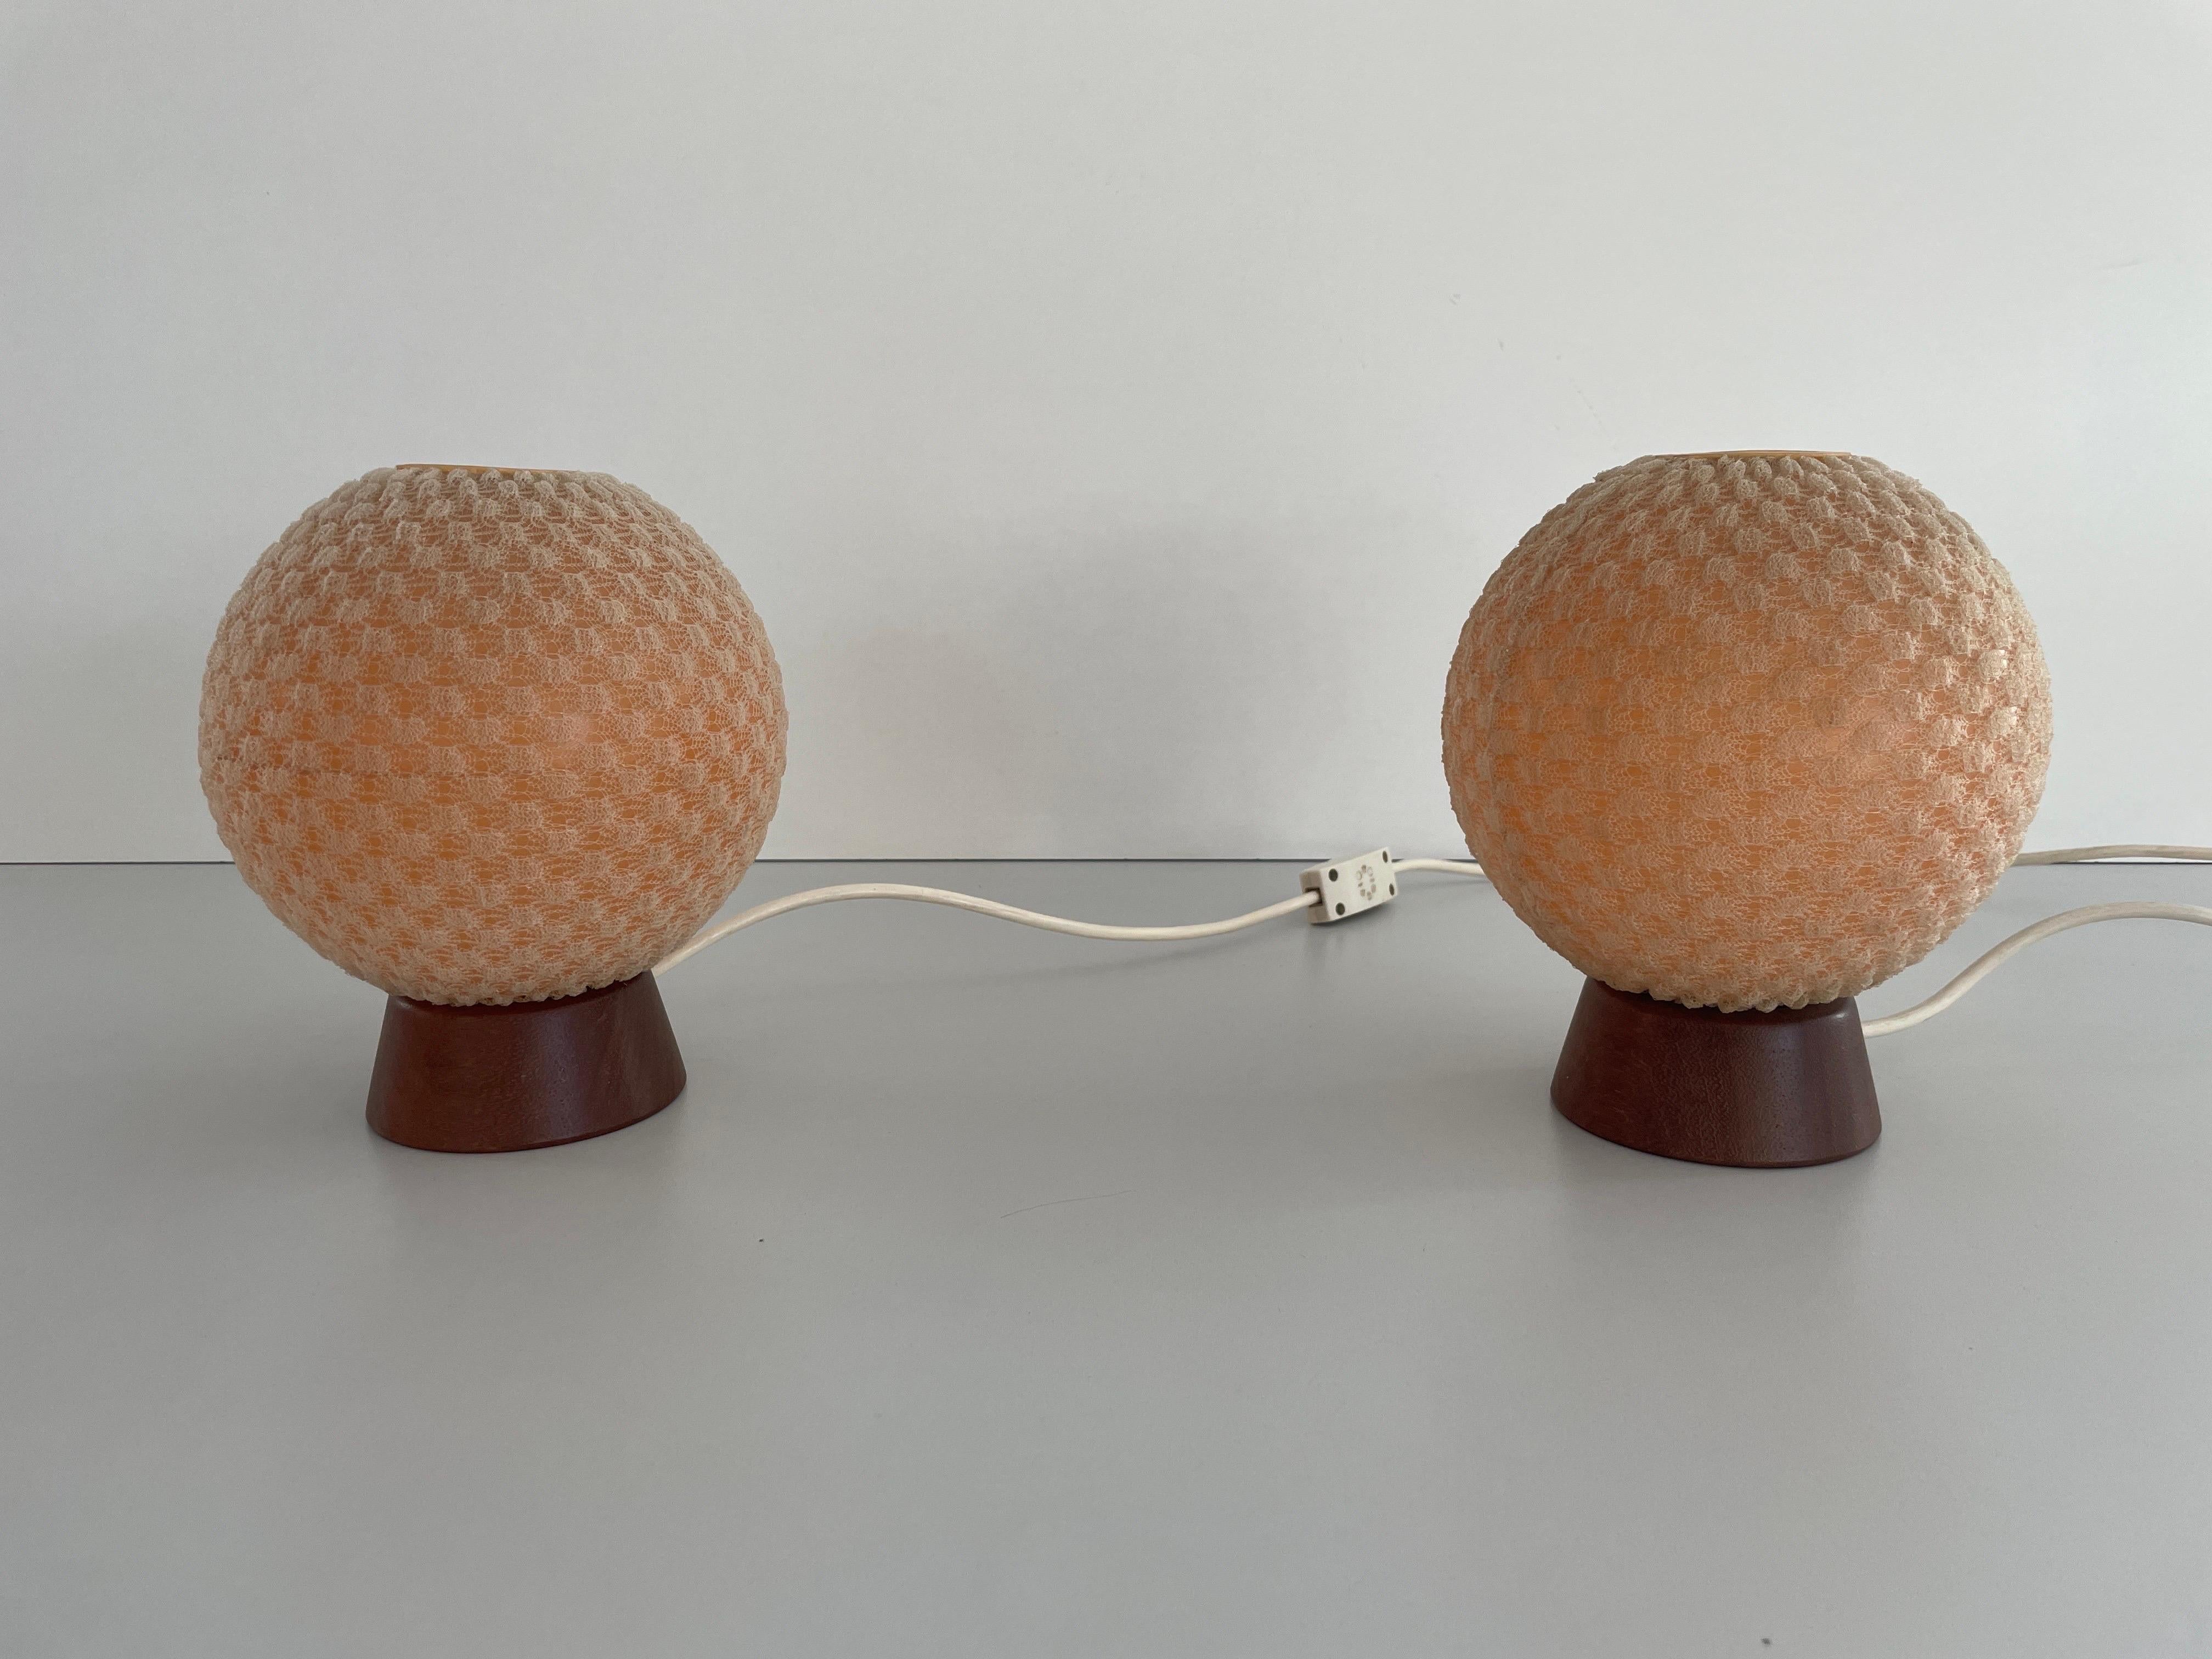 Teak & Ball Fabric Shade Pair of Bedside Lamps by Temde, 1960s Germany

Elegant and minimal design table lamps

Lampshades is in good condition and very clean. 

This lamp works with E14 light bulb. 
Wired and suitable to use with 220V and 110V for